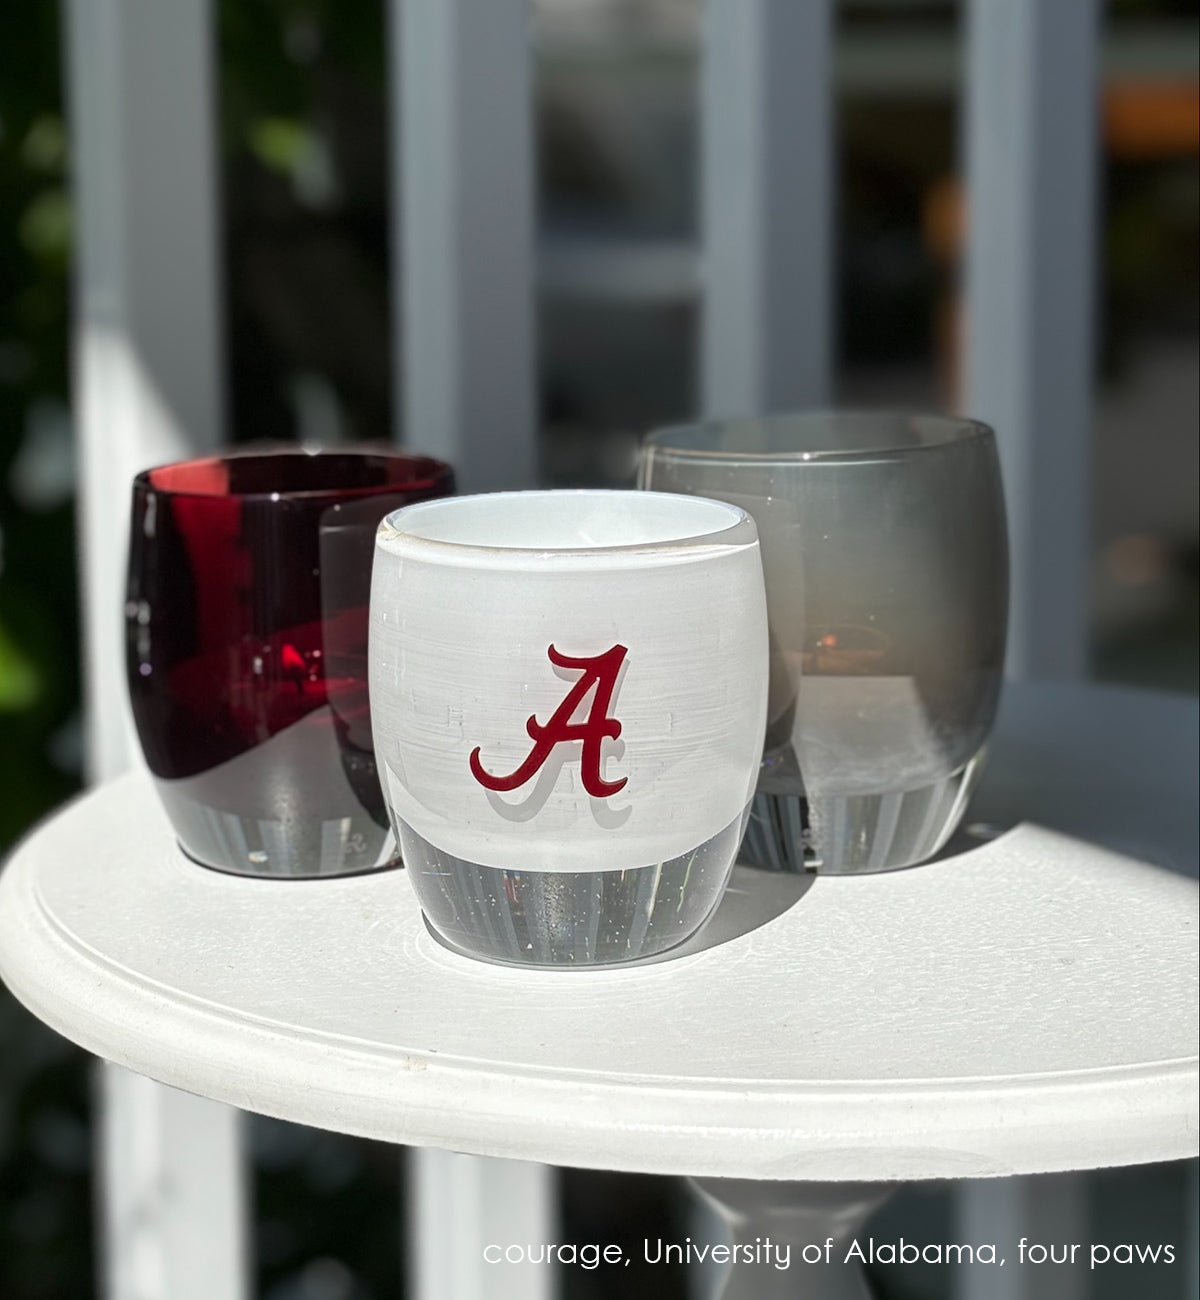 etched University of Alabama college logo on a white hand-blown glass candle holder sitting on a white table with a courage and four paws glassybaby.